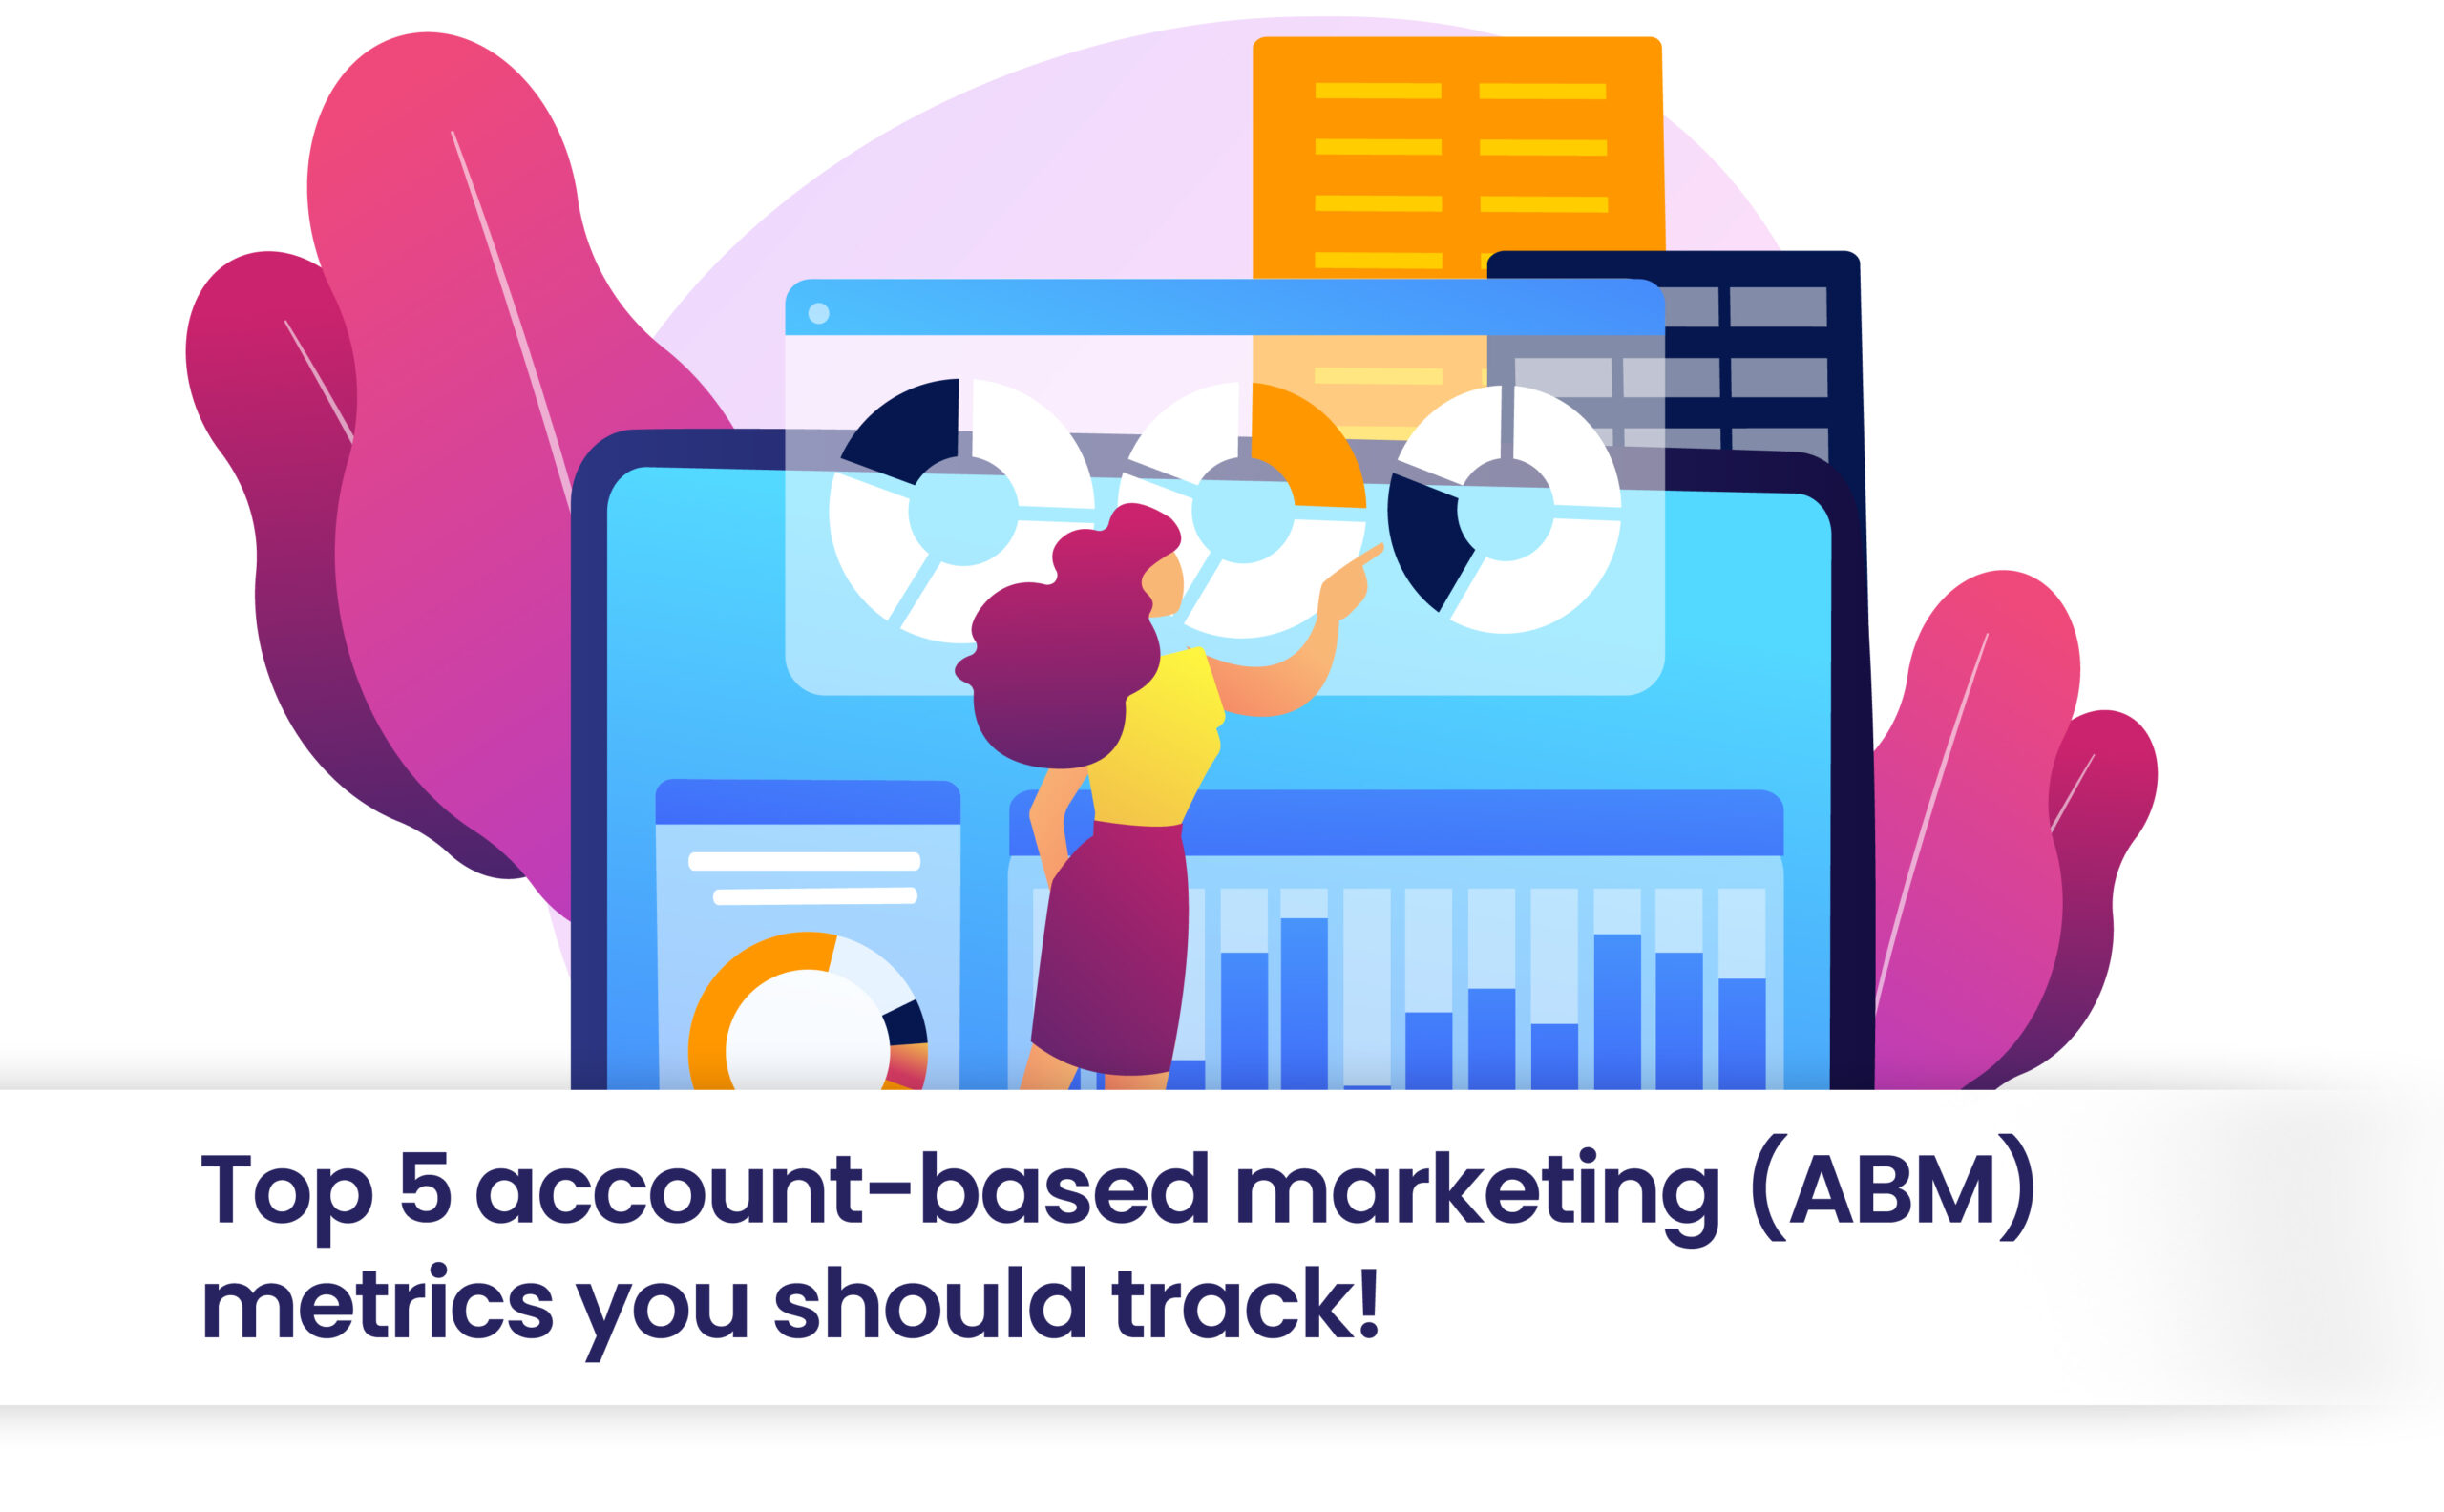 Top 5 account-based marketing